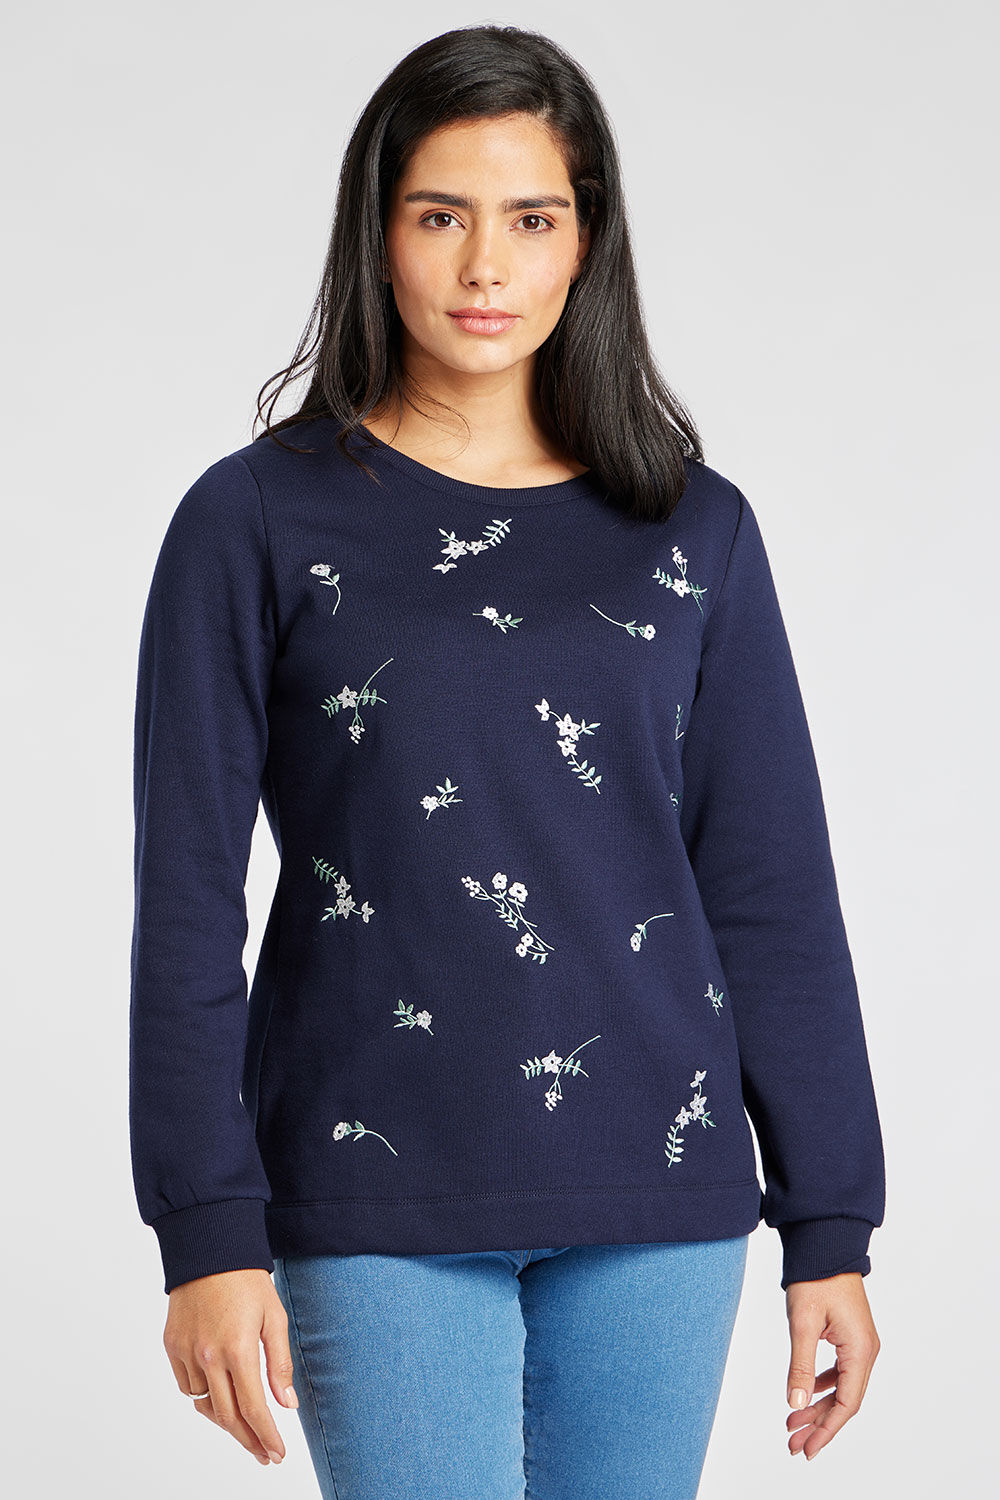 Bonmarche Navy Long Sleeve Embroidered Sprigs Sweatshirt, Size: 10